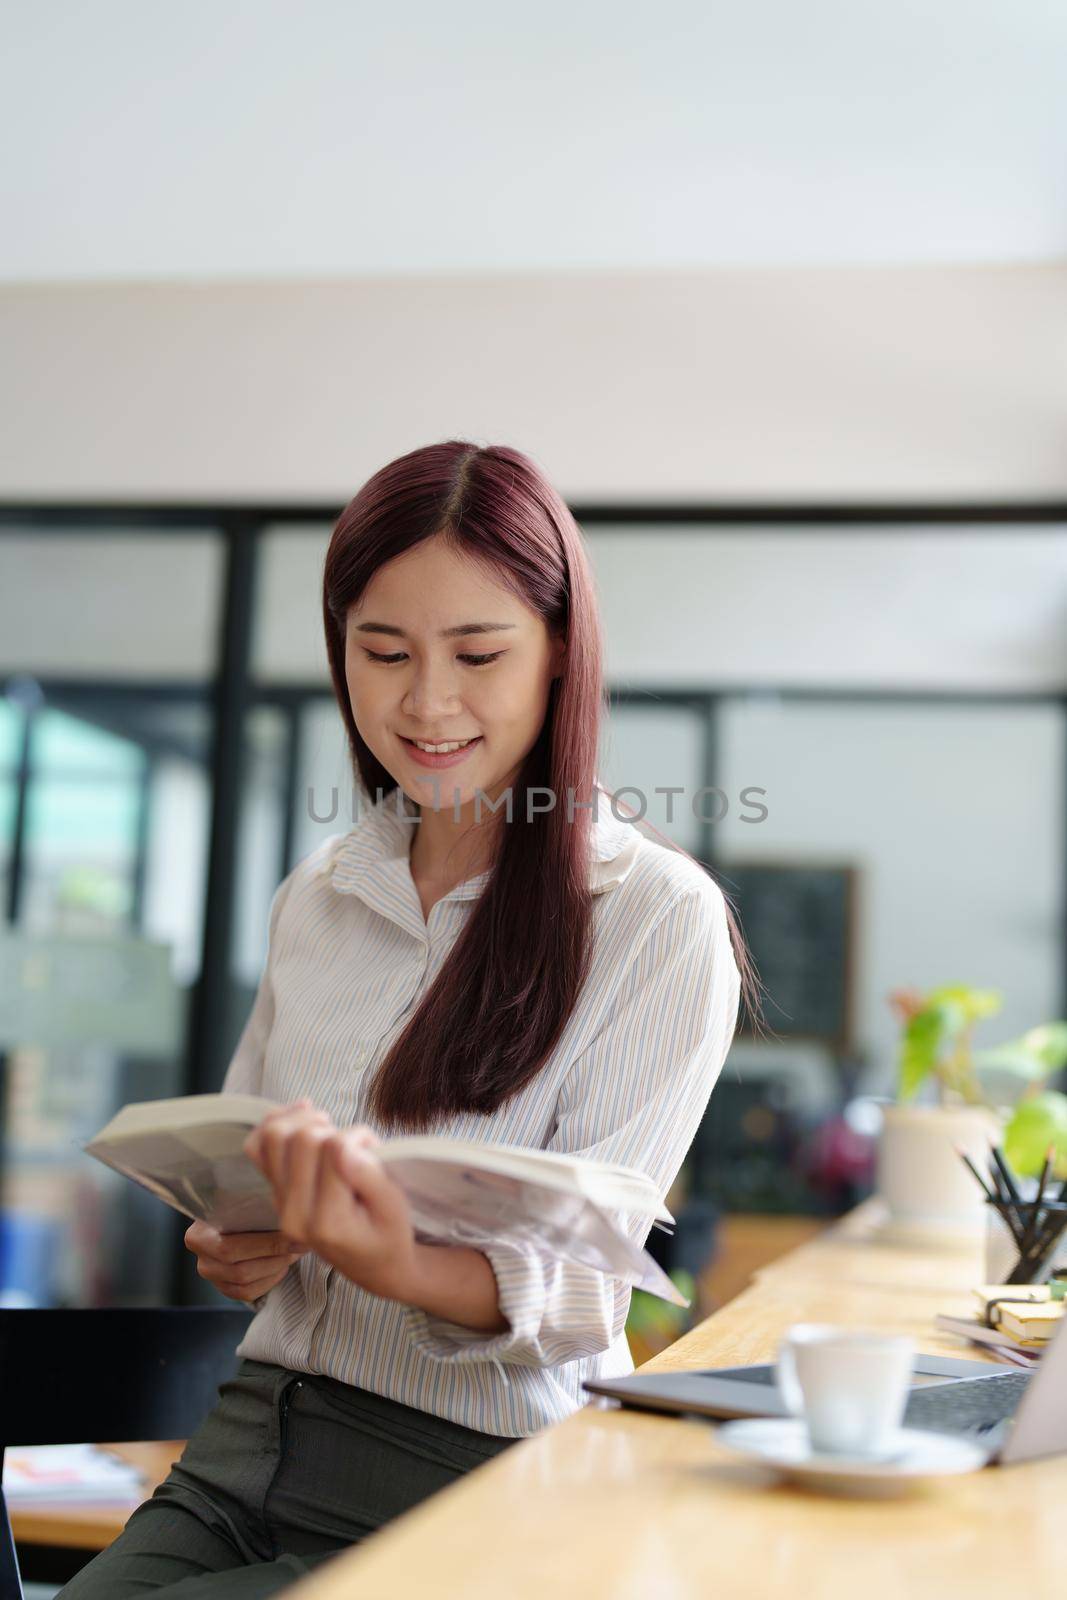 Portrait of an Asian woman reading a book during her lunch break by Manastrong